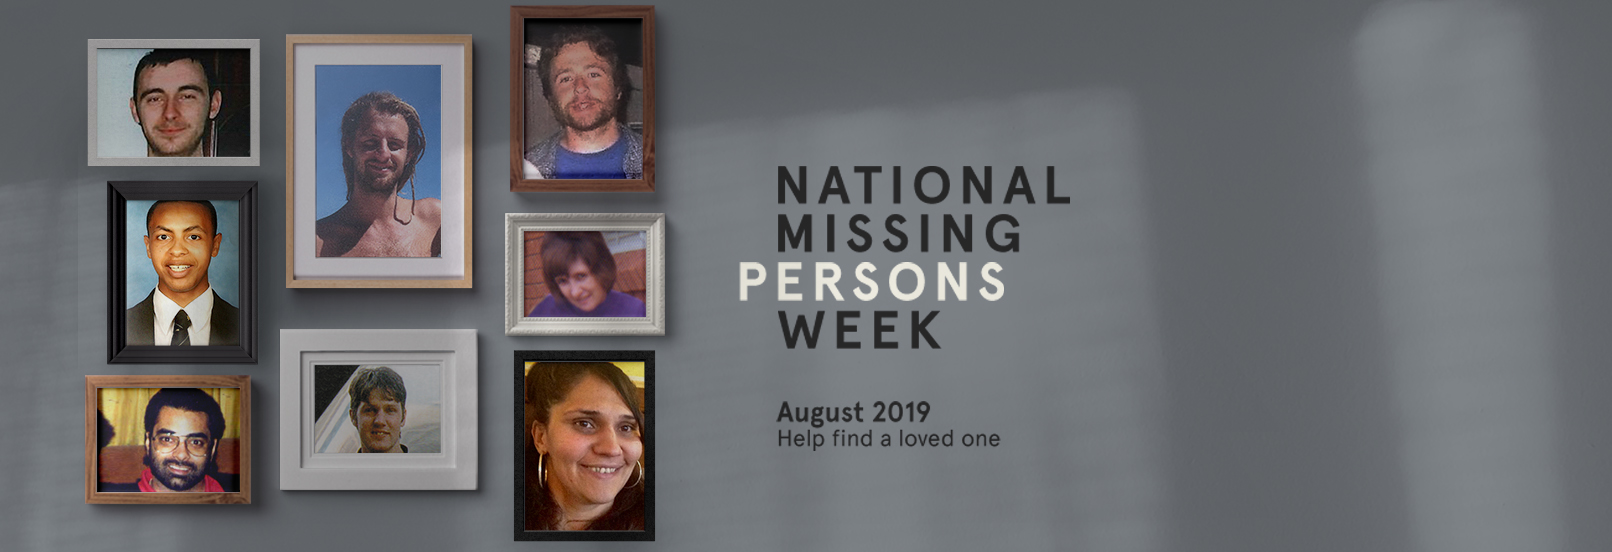 National Missing Persons Week Cover Image